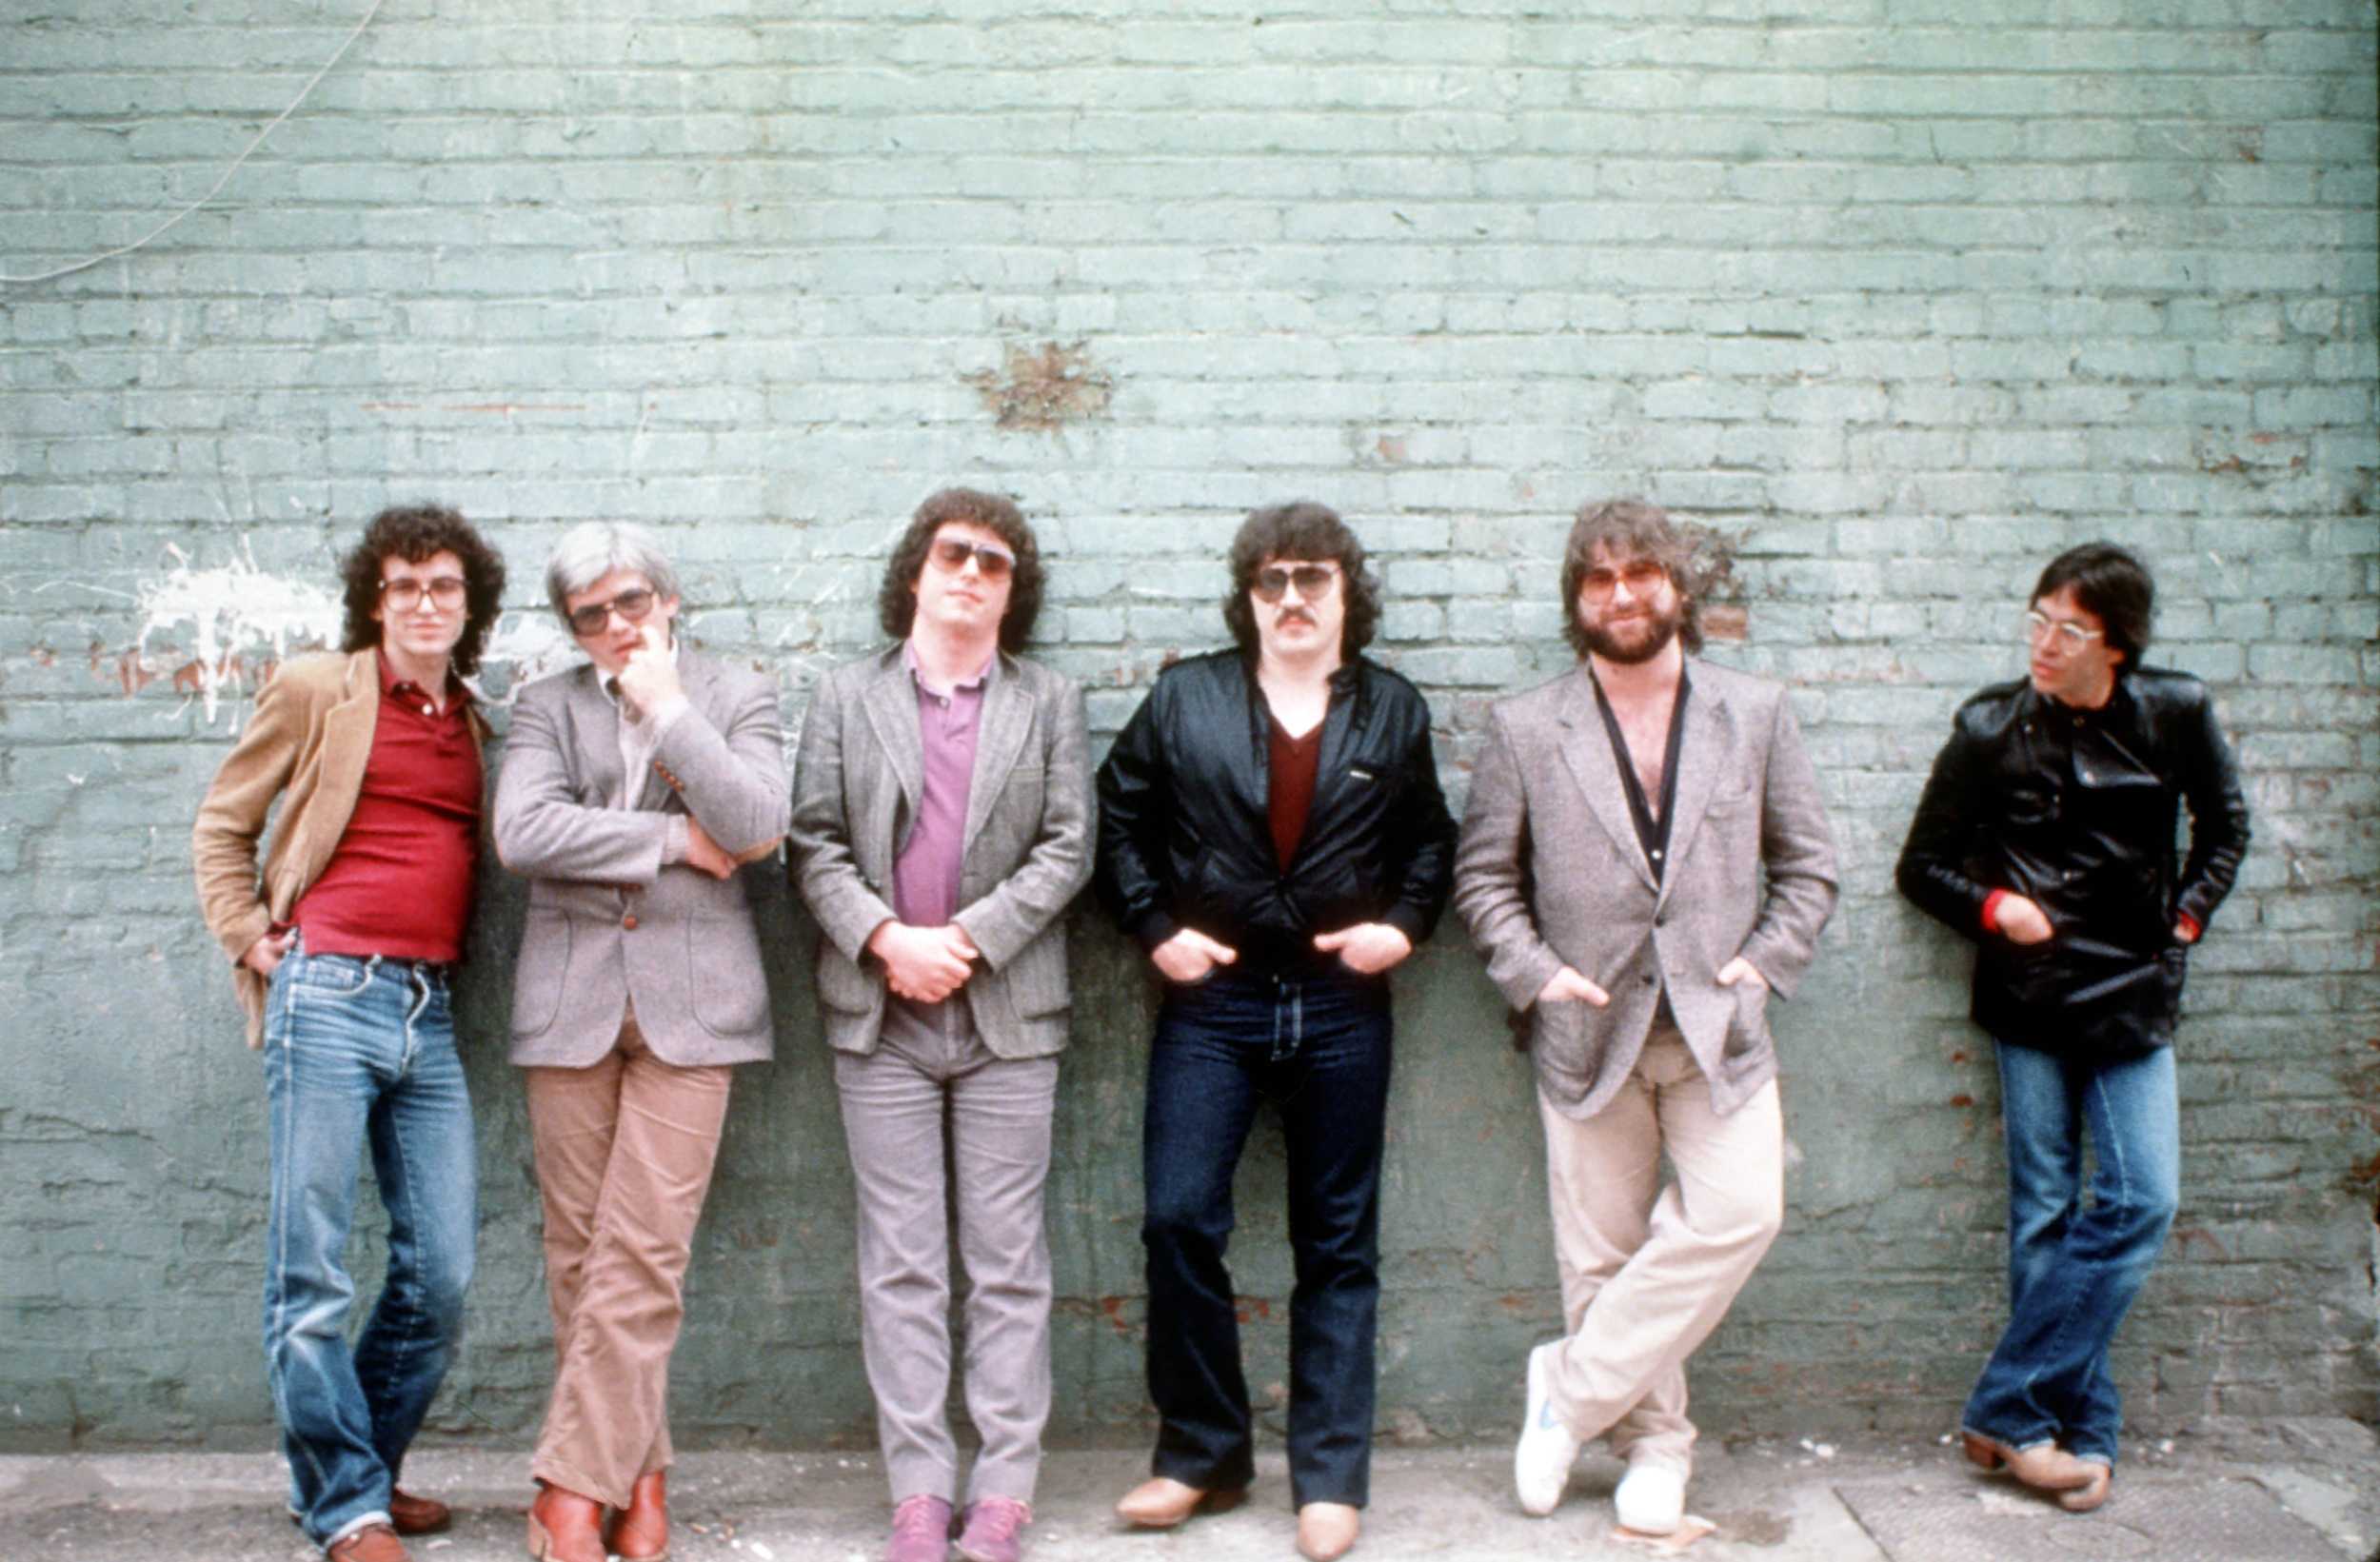 <p>Toto rightfully has a place in the yacht rock world, but the band also broke into the top-40, FM radio, and MTV mainstream with the release of 1982's <em>Toto IV</em>. <a href="https://www.youtube.com/watch?v=qmOLtTGvsbM">"Rosanna"</a> was a big reason for the album's success, peaking at No. 2 on <em>Billboard</em>'s Hot 100 and winning the Record of the Year Grammy Award. Sure, it's not typical yacht rock fare, per se. It's certainly heavier than other popular tracks on this list, but it's certainly a product of AOR and still routinely played in dentist offices throughout America. </p><p>You may also like: <a href='https://www.yardbarker.com/entertainment/articles/the_definitive_pink_floyd_playlist_011124/s1__36265397'>The definitive Pink Floyd playlist</a></p>